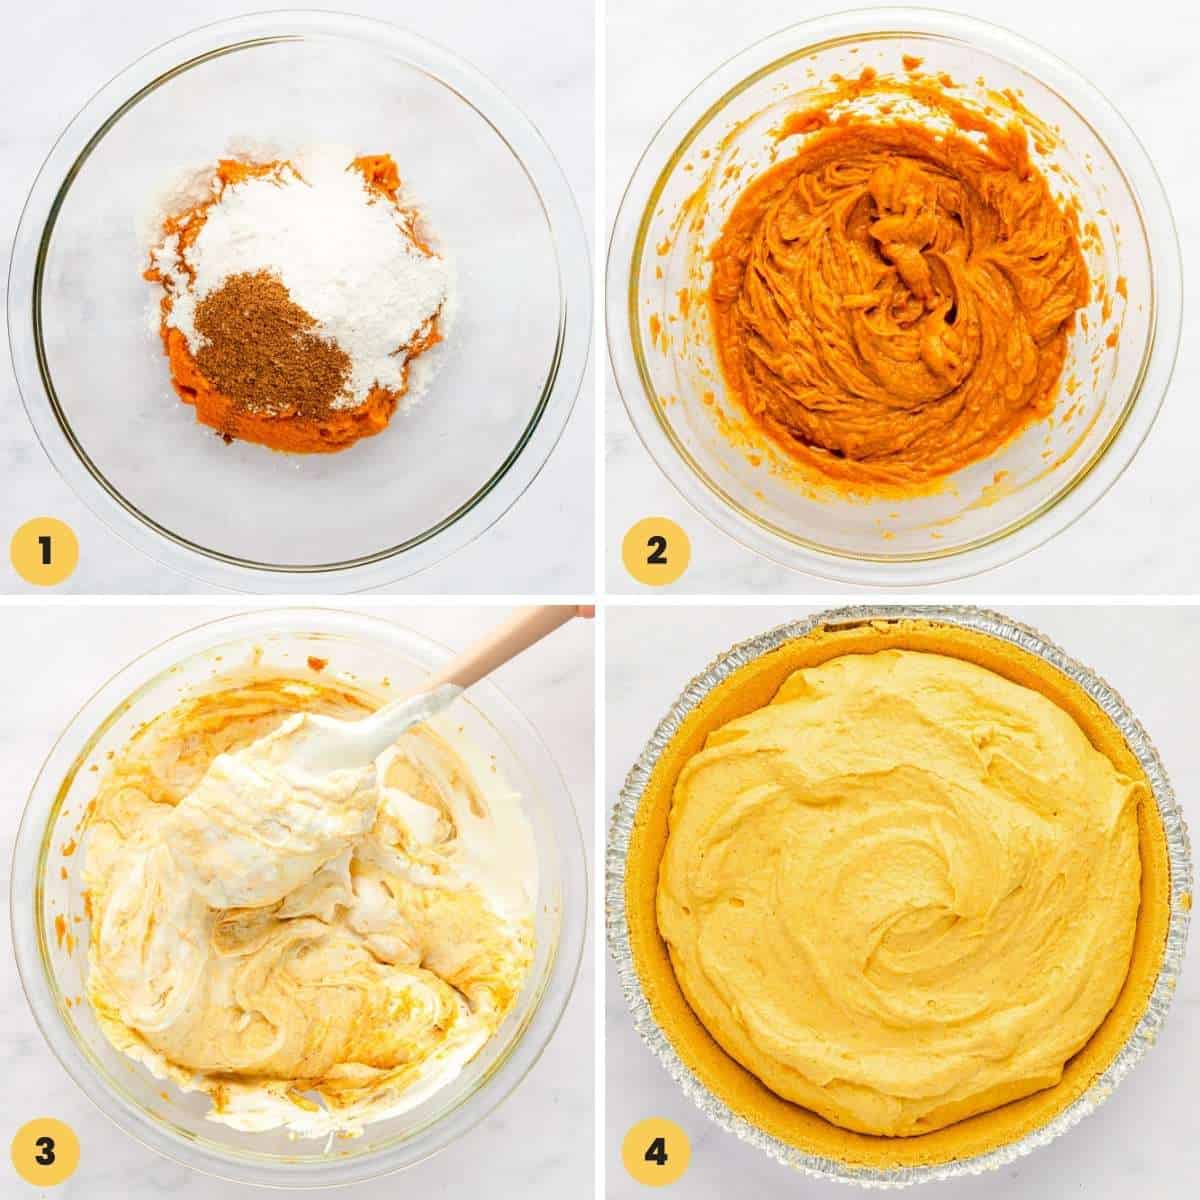 a collage of four images showing steps to make no bake pumpkin pie with graham cracker crust.